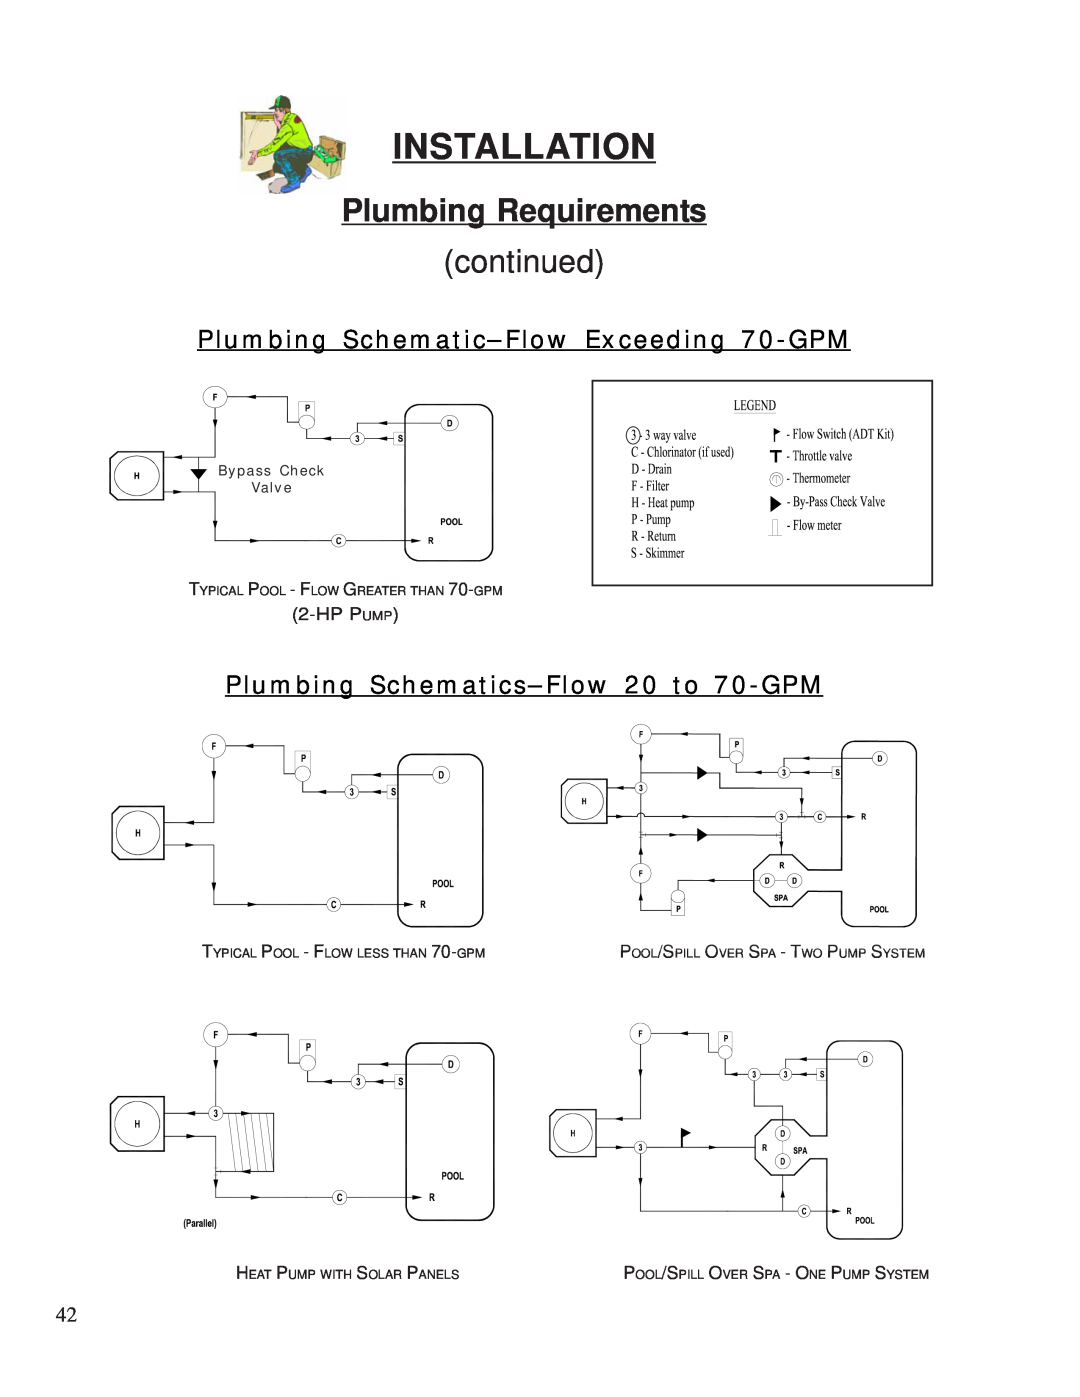 Aquacal 100 owner manual Installation, Plumbing Requirements, continued, Plumbing Schematic-FlowExceeding 70-GPM, Hppump 